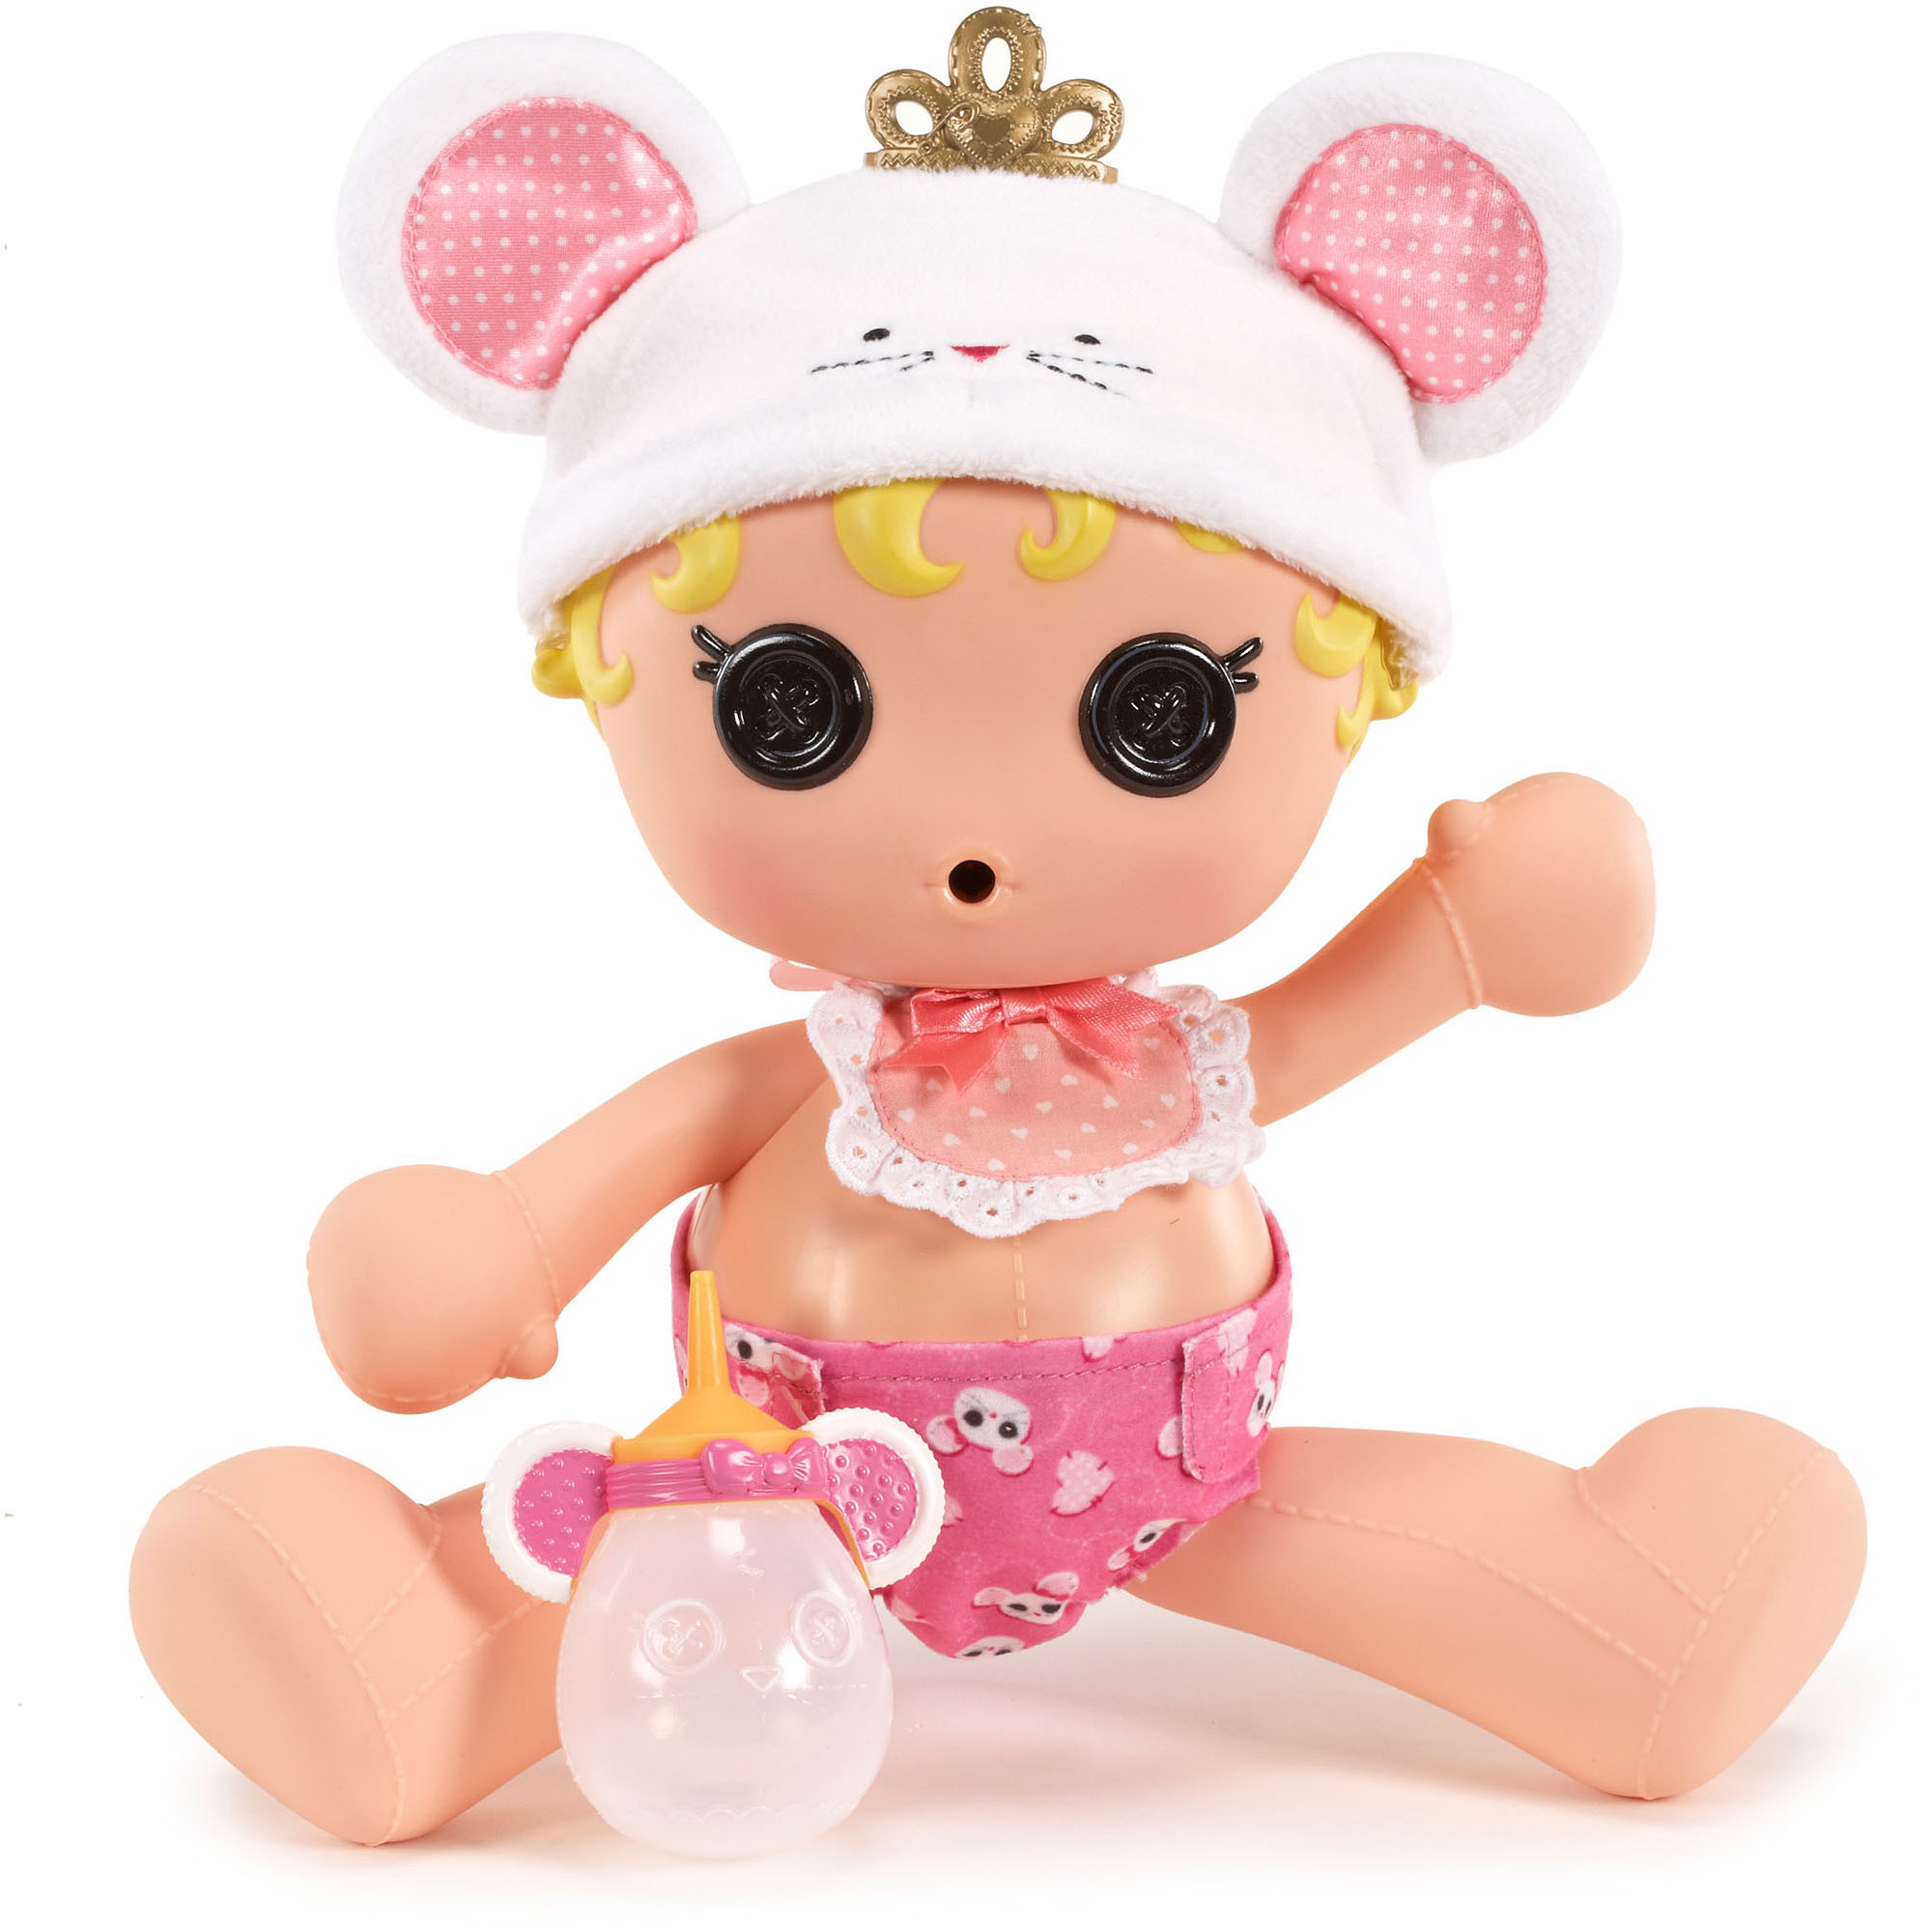 Lalaloopsy Babies Diaper Surprise Doll, Cinder Slippers - image 1 of 2